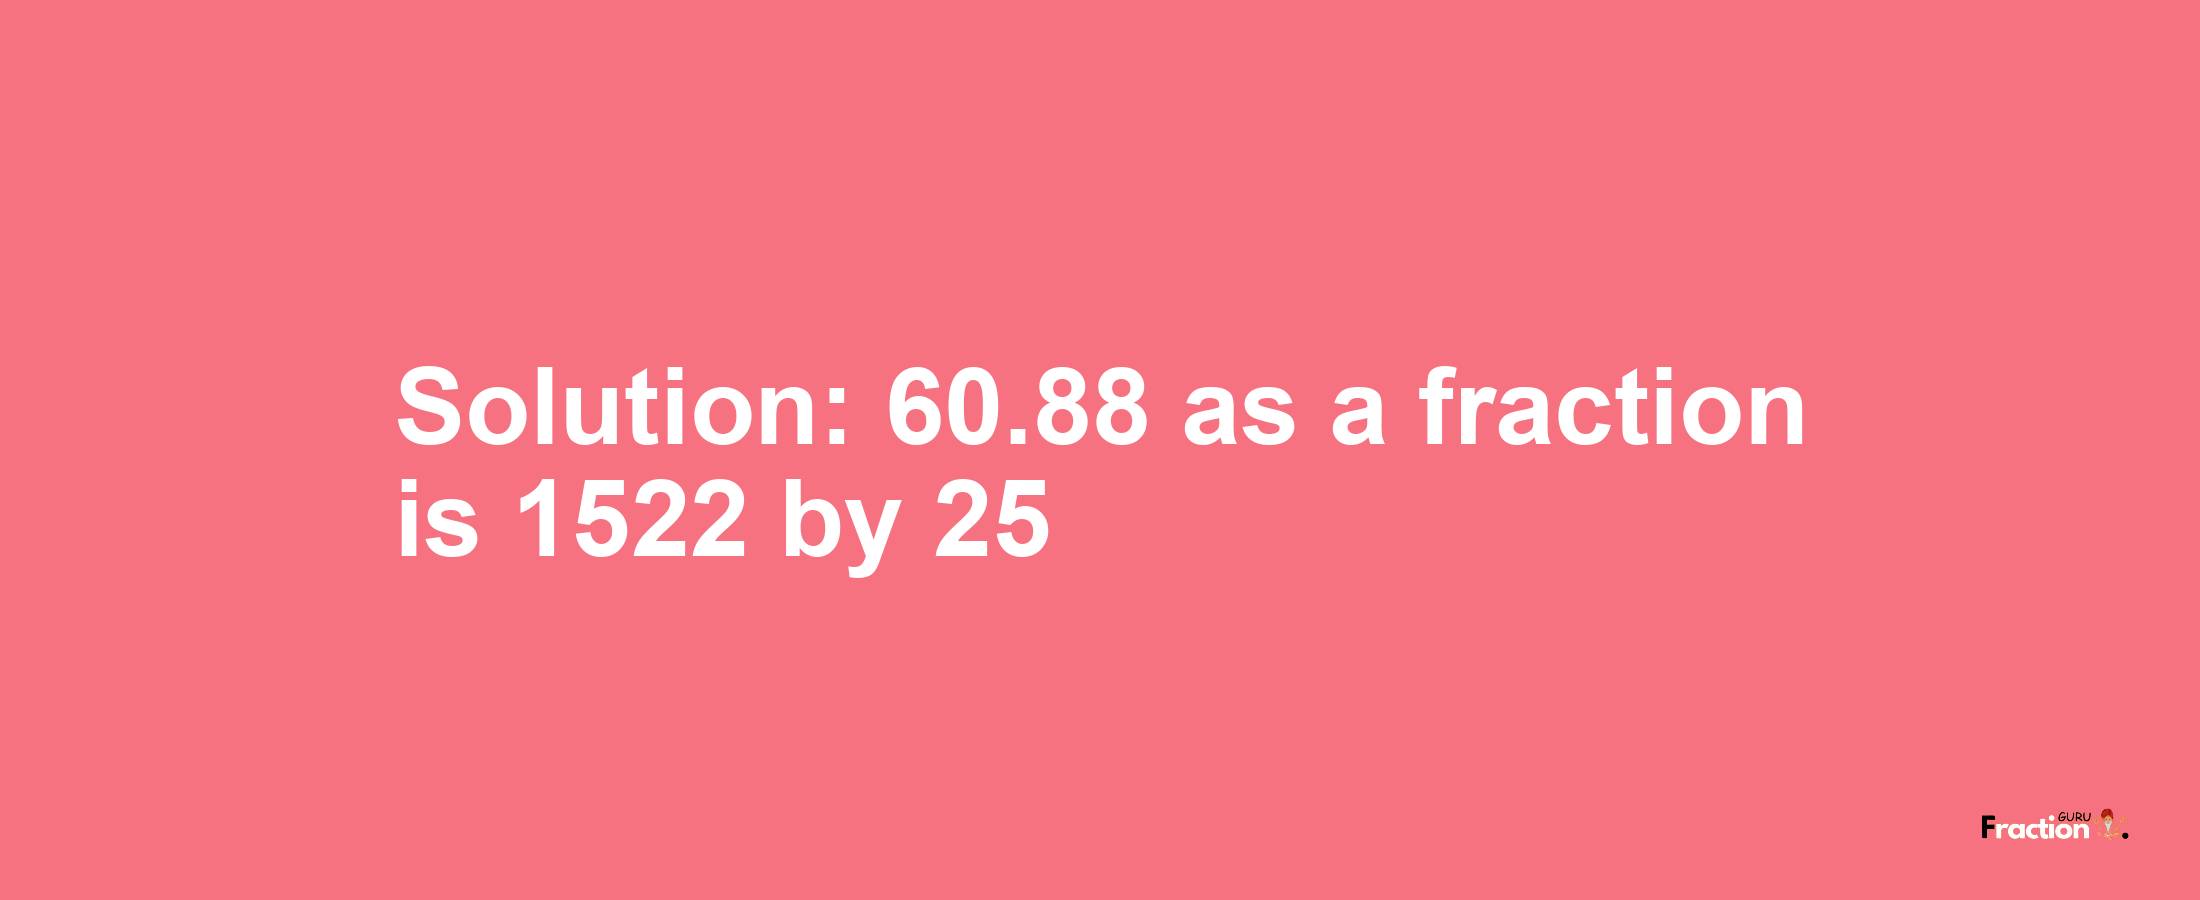 Solution:60.88 as a fraction is 1522/25